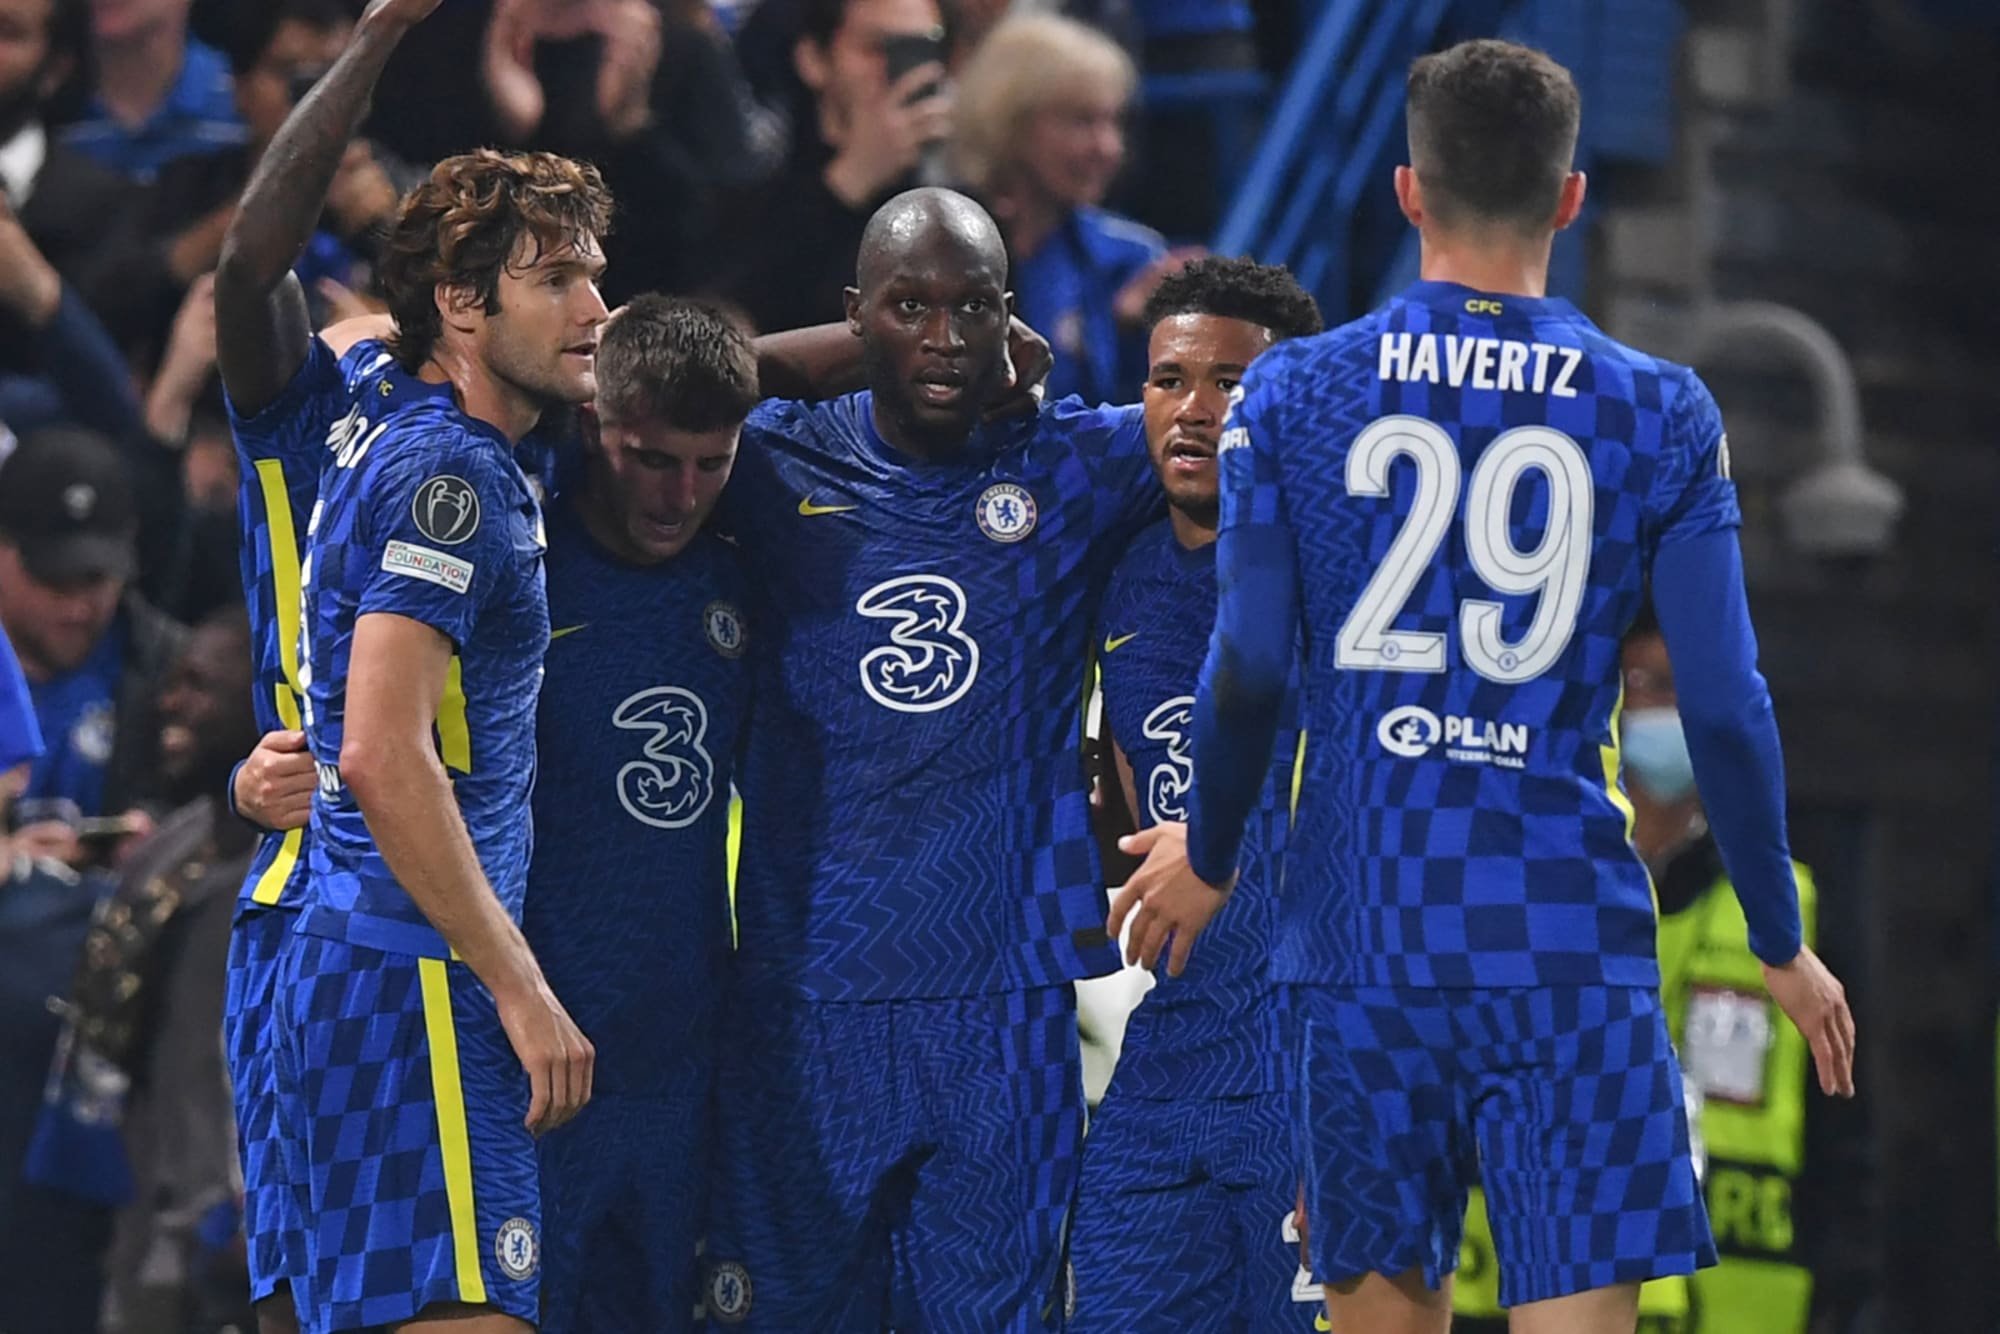 Chelsea vs Zenit: Three lessons learnt Champions League opener